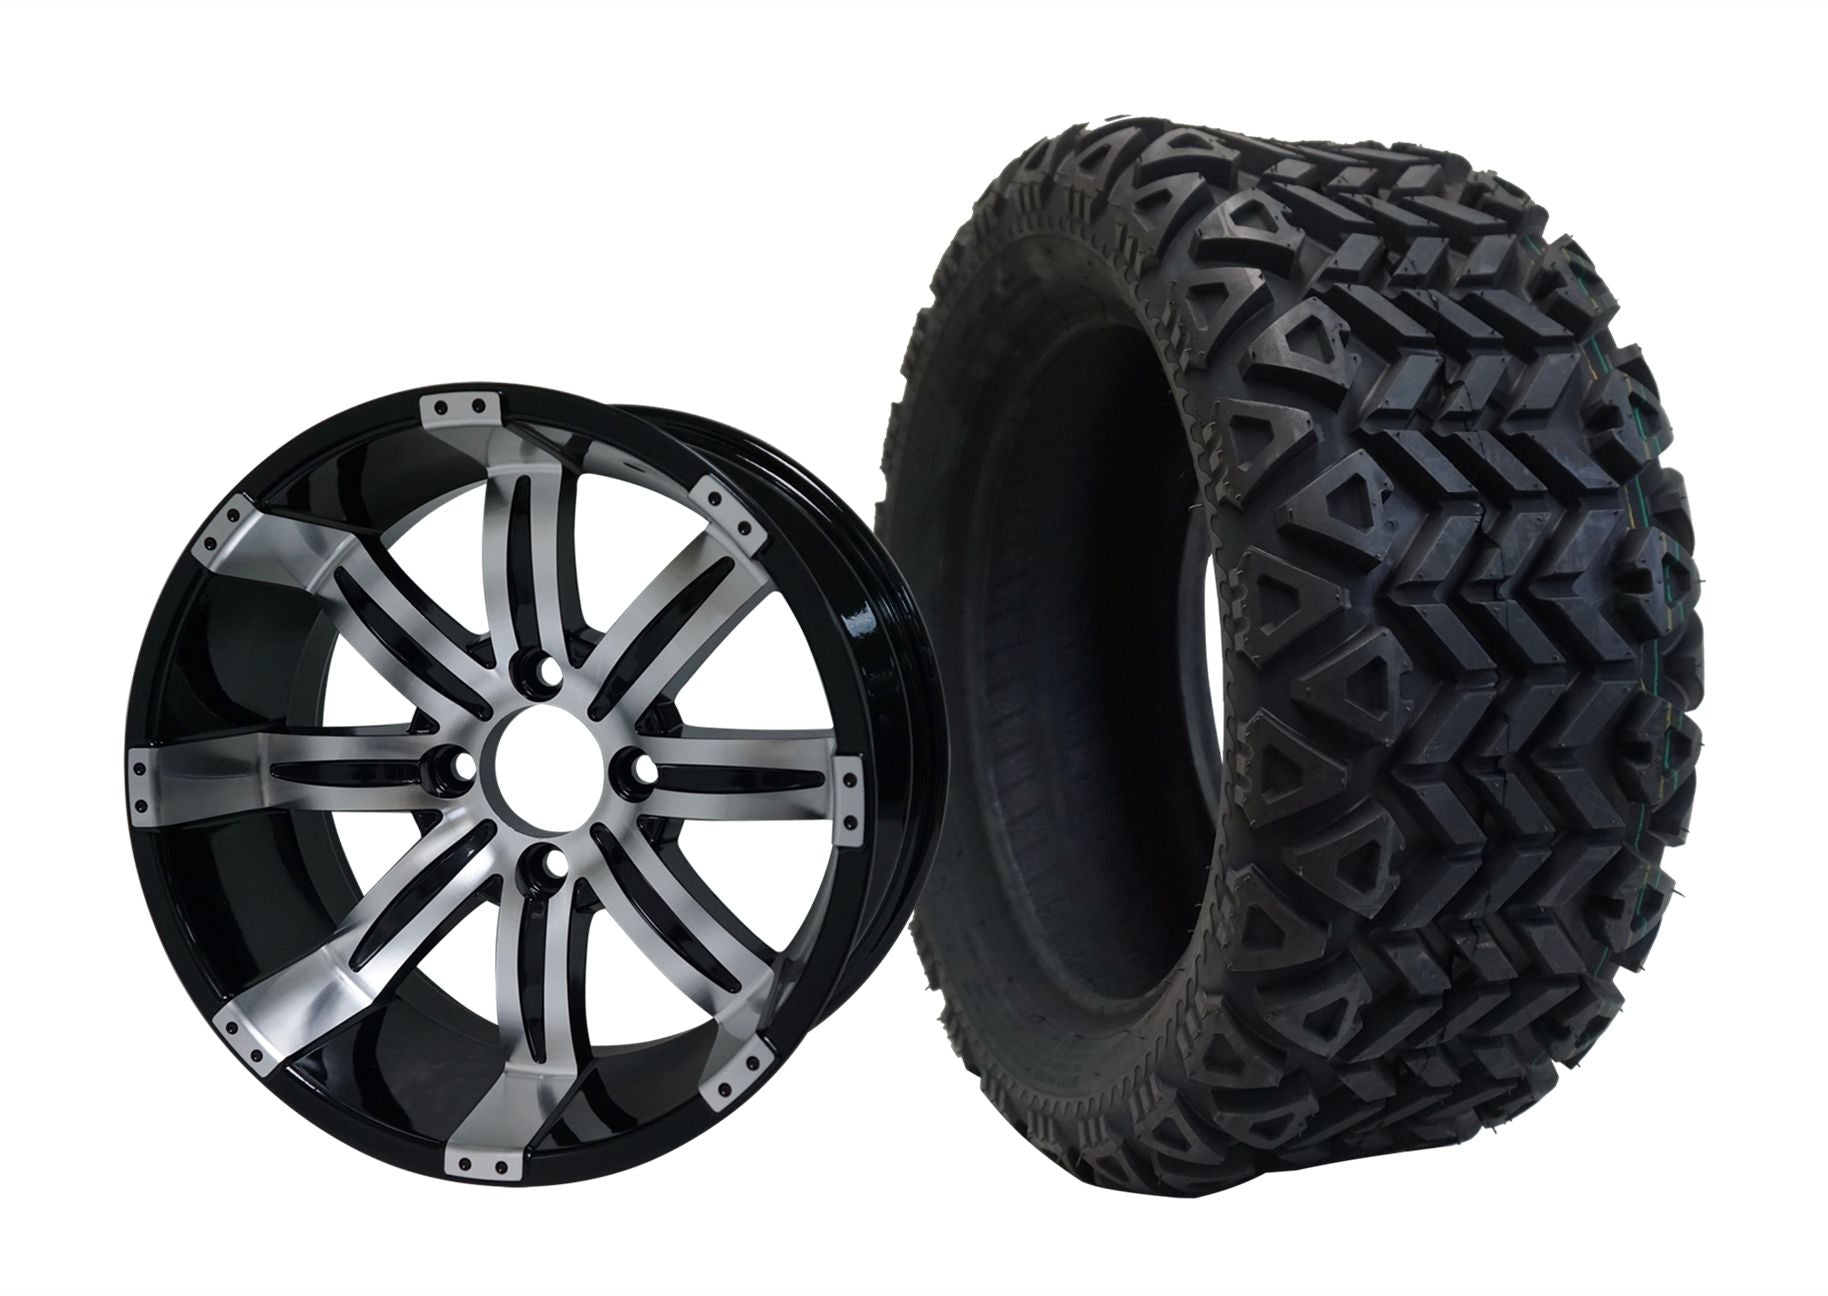 SGC 14" x 7" Tempest Machined/Black Wheel - Aluminum Alloy STEELENG 23"x10"-14" All Terrain Tire DOT Approved WH1406-TR1403